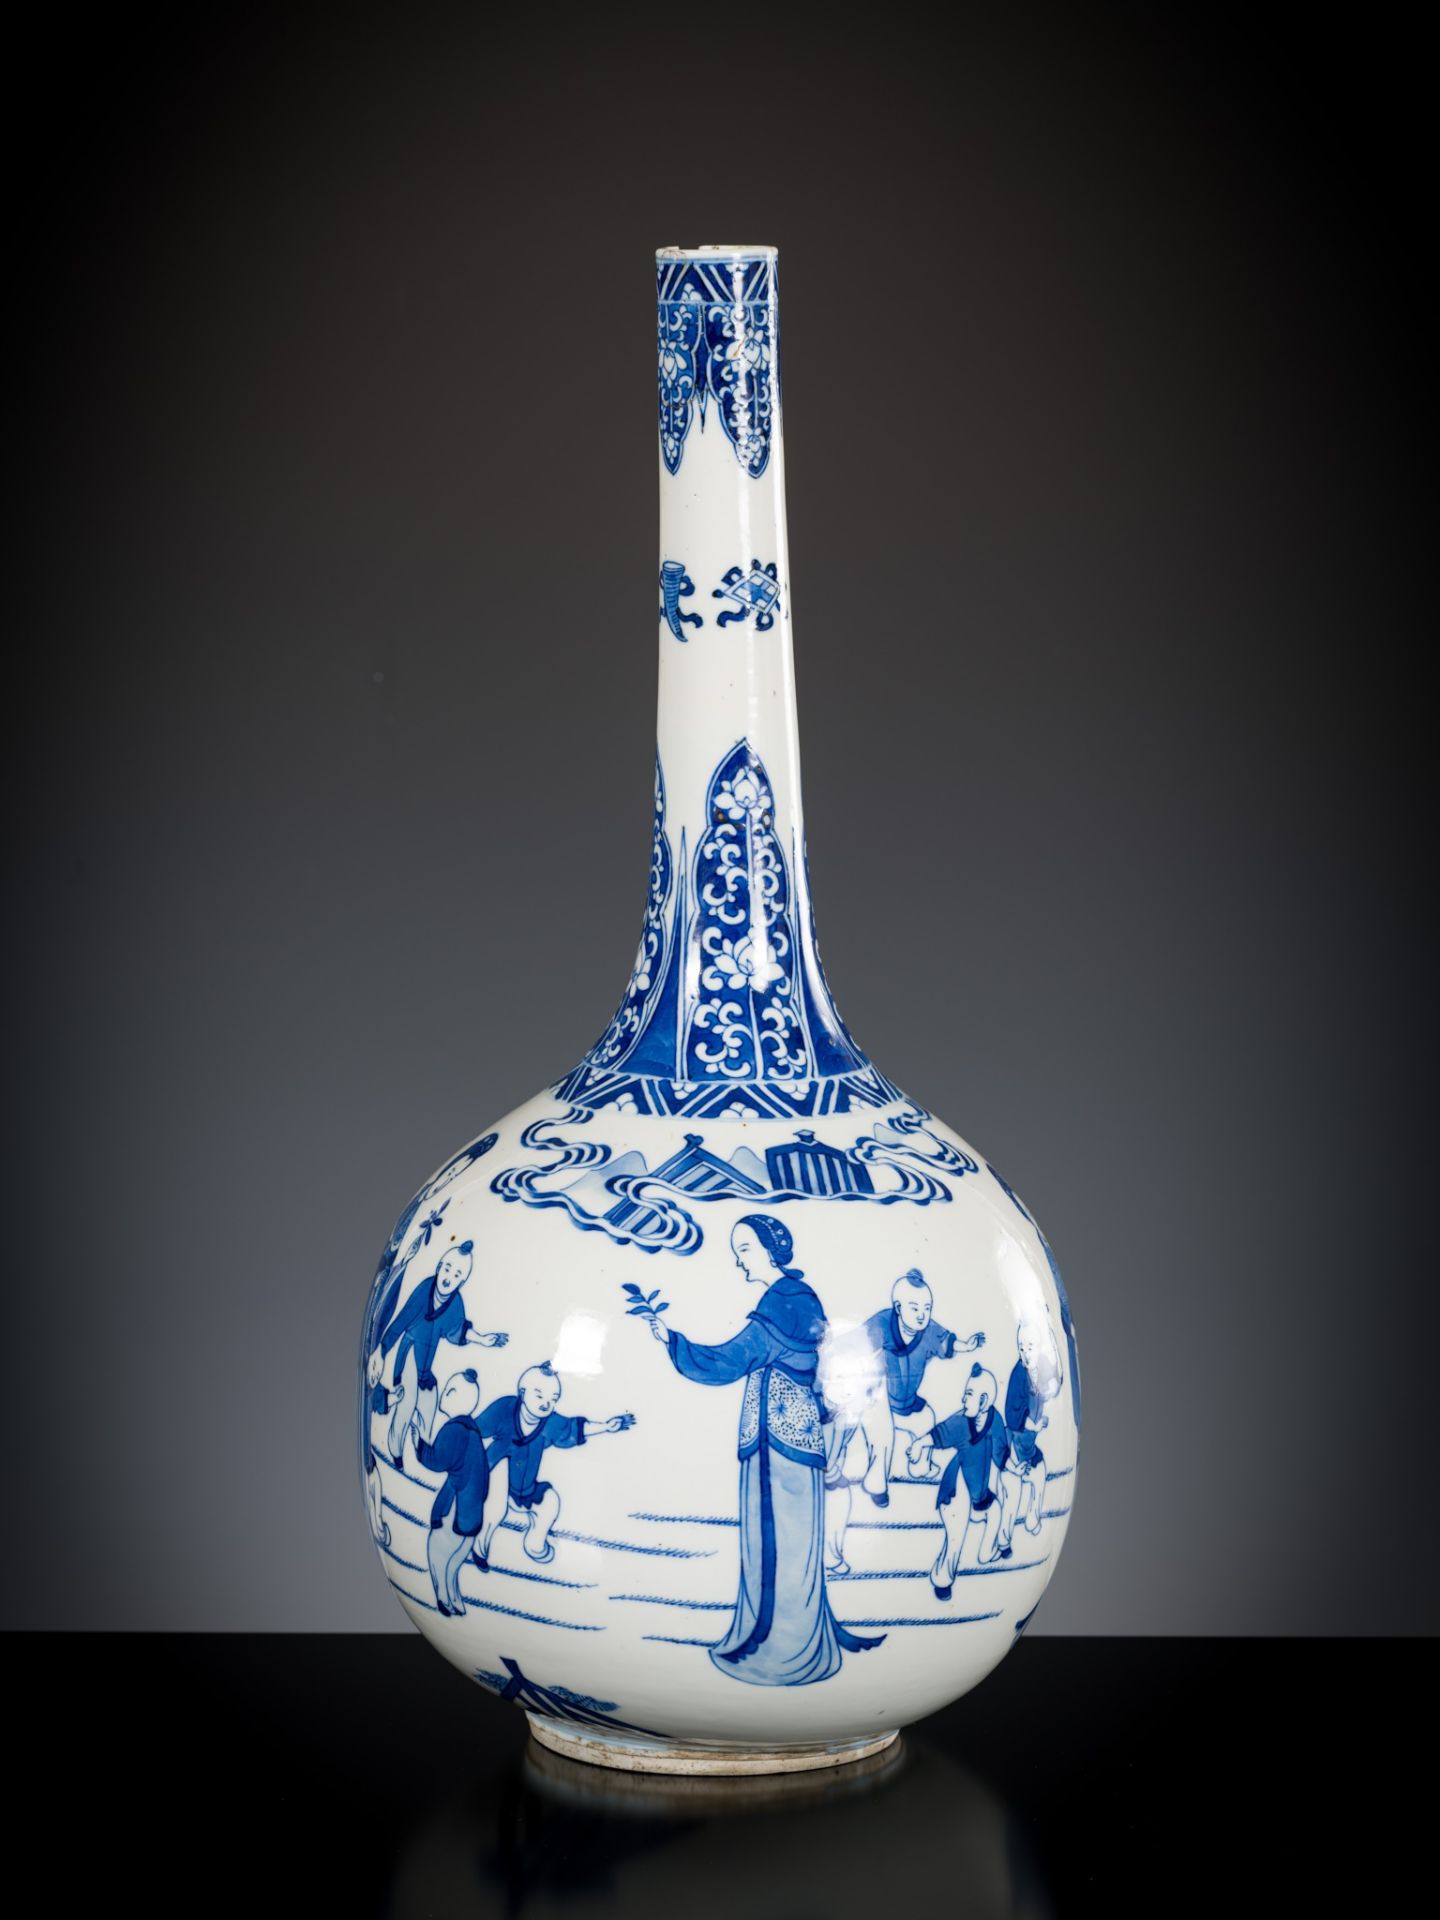 A LARGE BLUE AND WHITE 'PLAYING DISCIPLES' BOTTLE VASE, CHINA, 18th - 19th CENTURY - Image 6 of 9